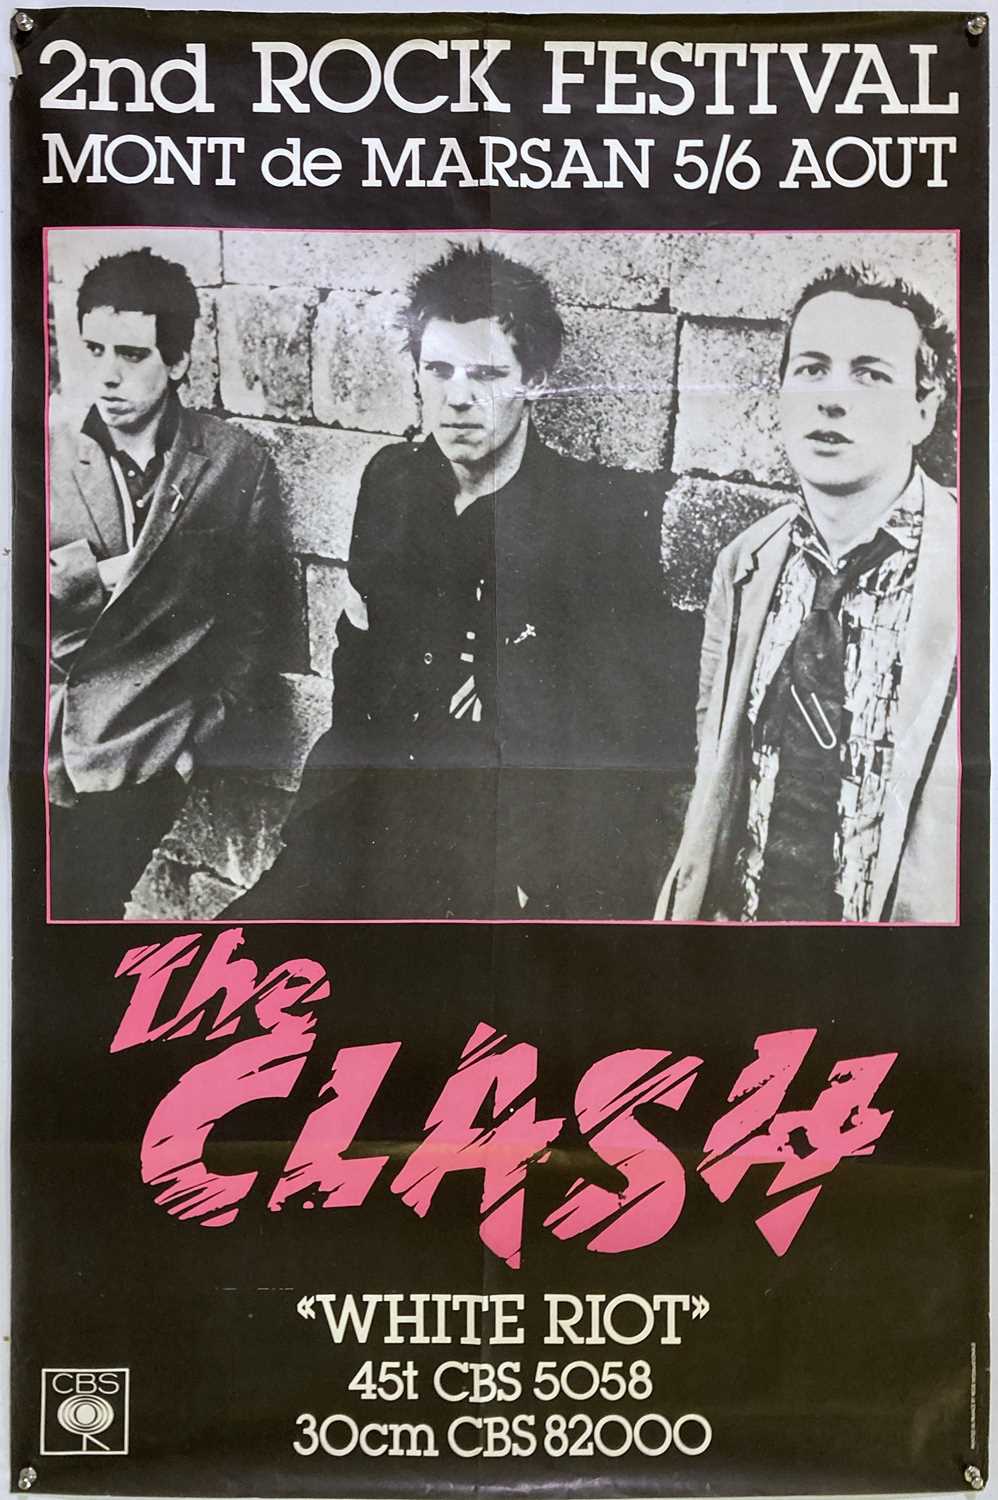 Lot 364 - THE CLASH - RARE 1977 FRENCH CONCERT POSTER.